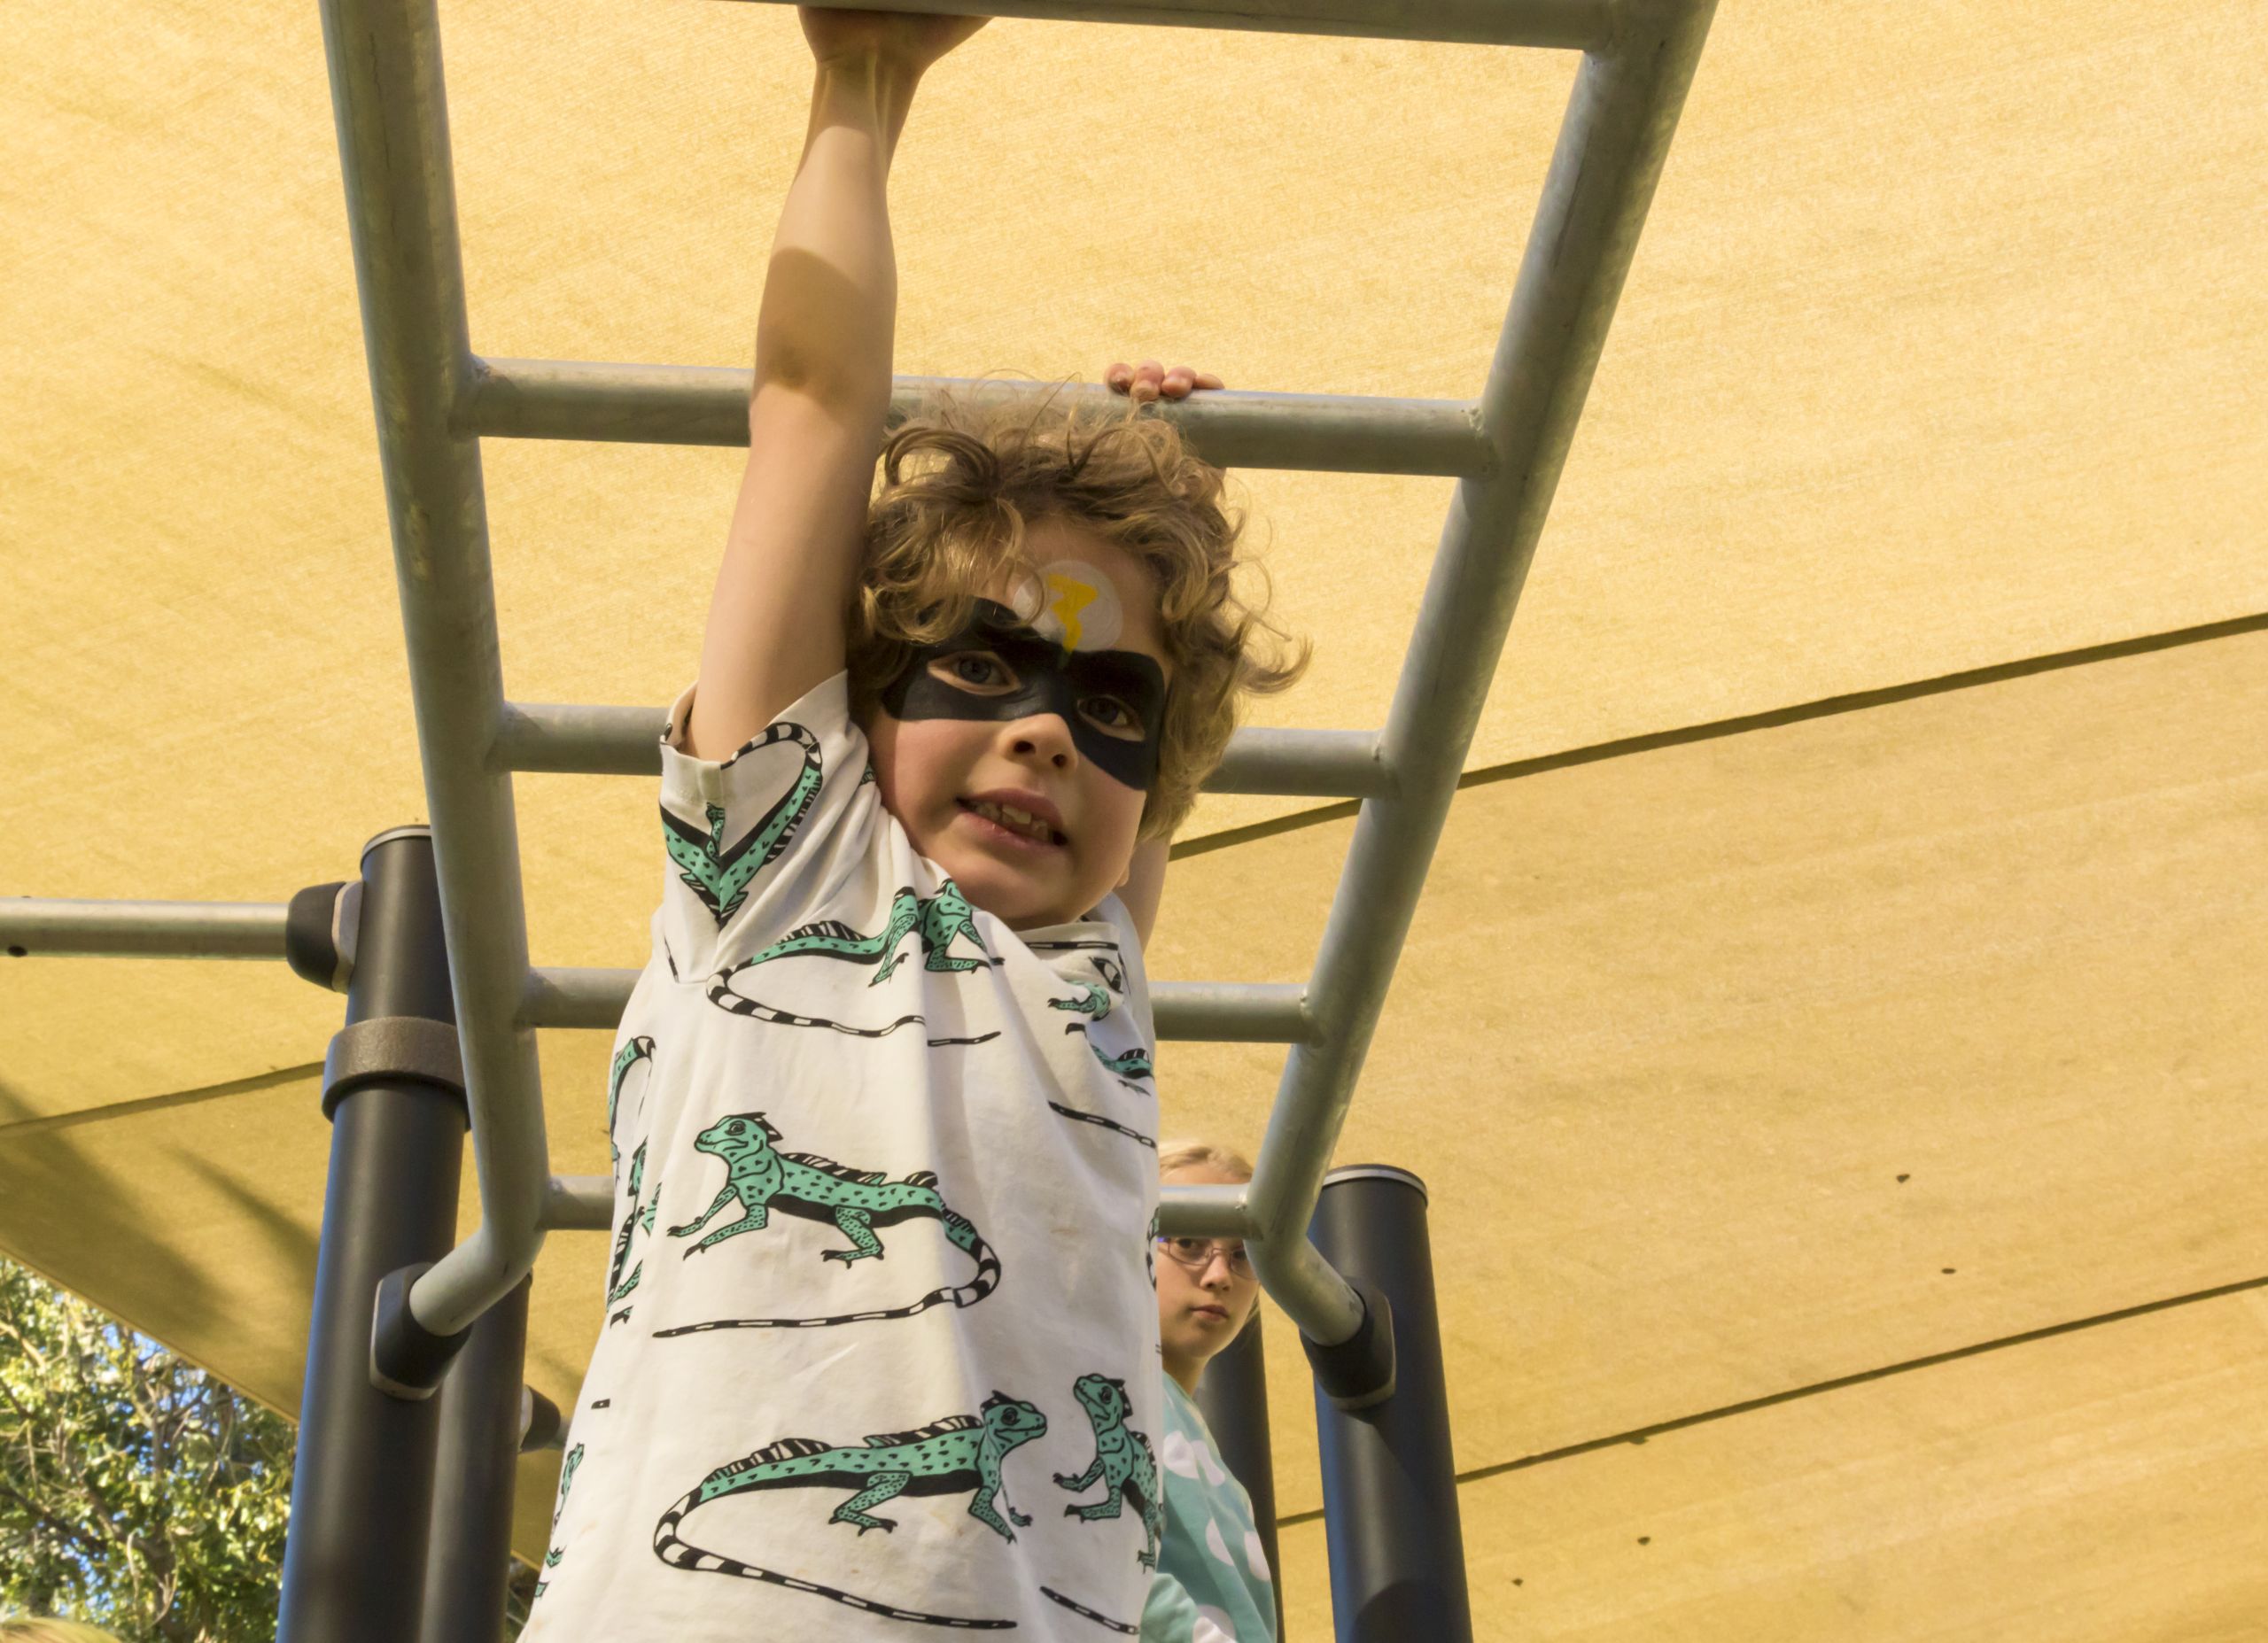 A child wearing a black eye mask is swinging on the monkey bars. He is smiling.